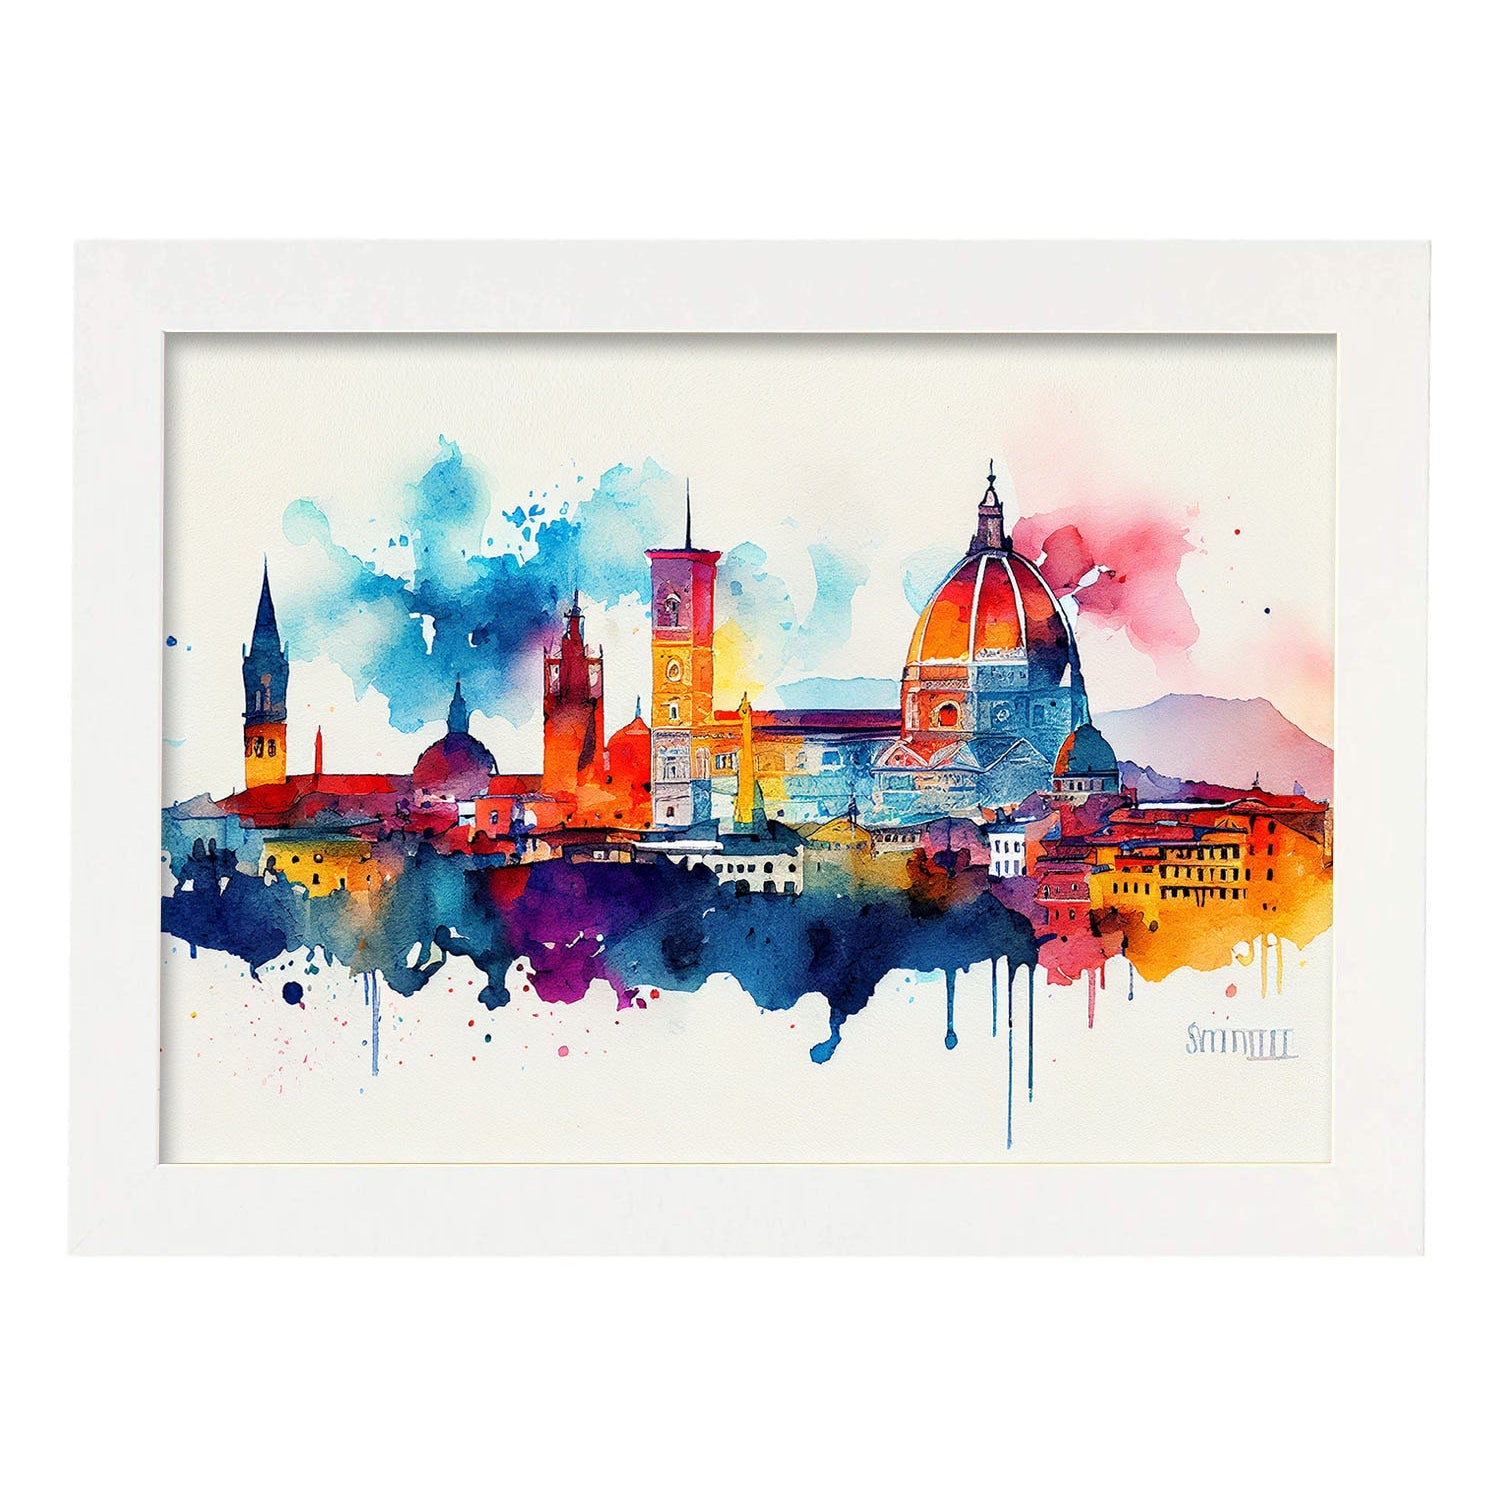 Nacnic watercolor of a skyline of the city of Florence_3. Aesthetic Wall Art Prints for Bedroom or Living Room Design.-Artwork-Nacnic-A4-Marco Blanco-Nacnic Estudio SL